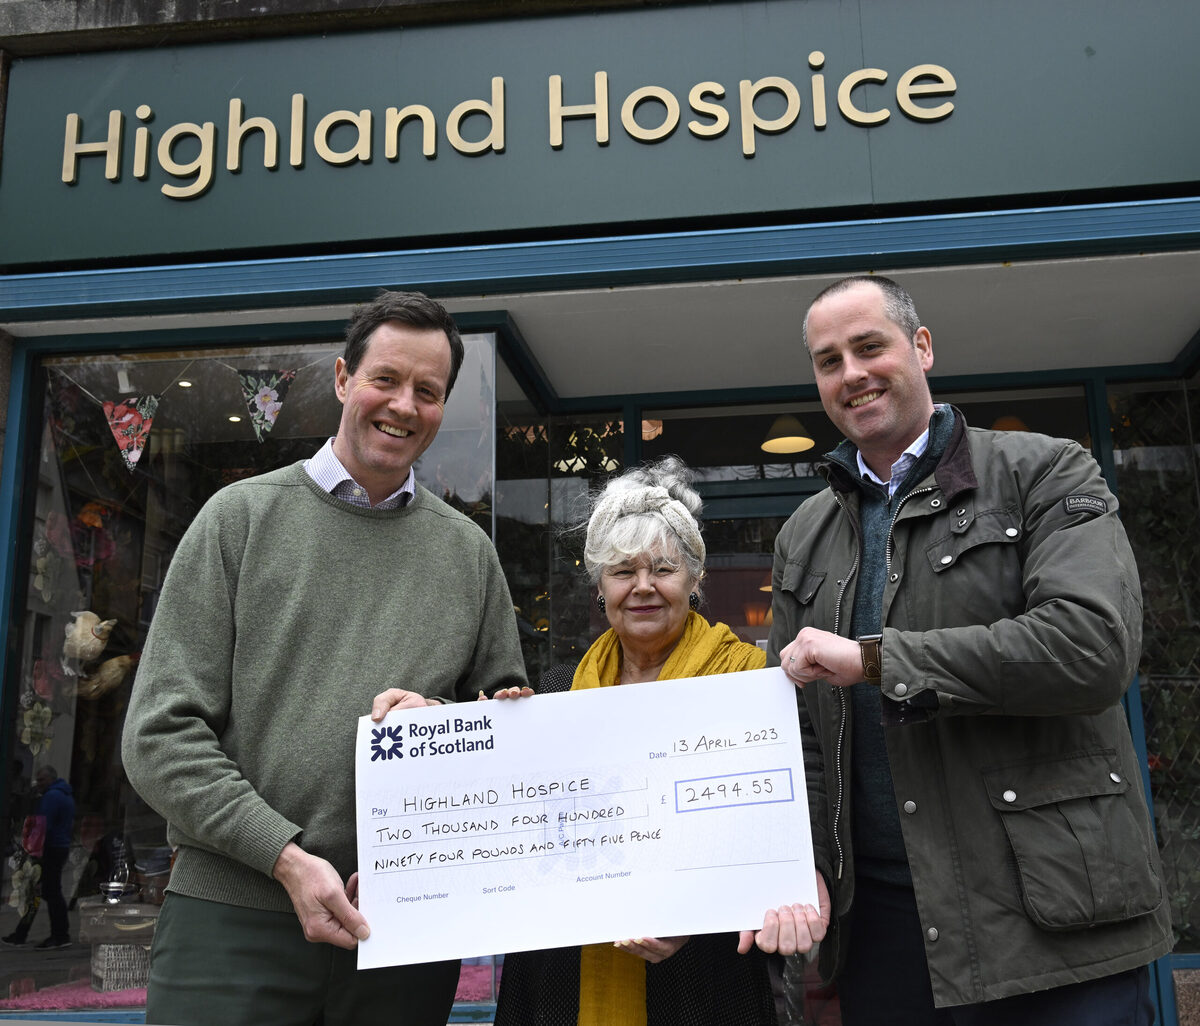 Highland Hospice benefits from entrepreneurial event success